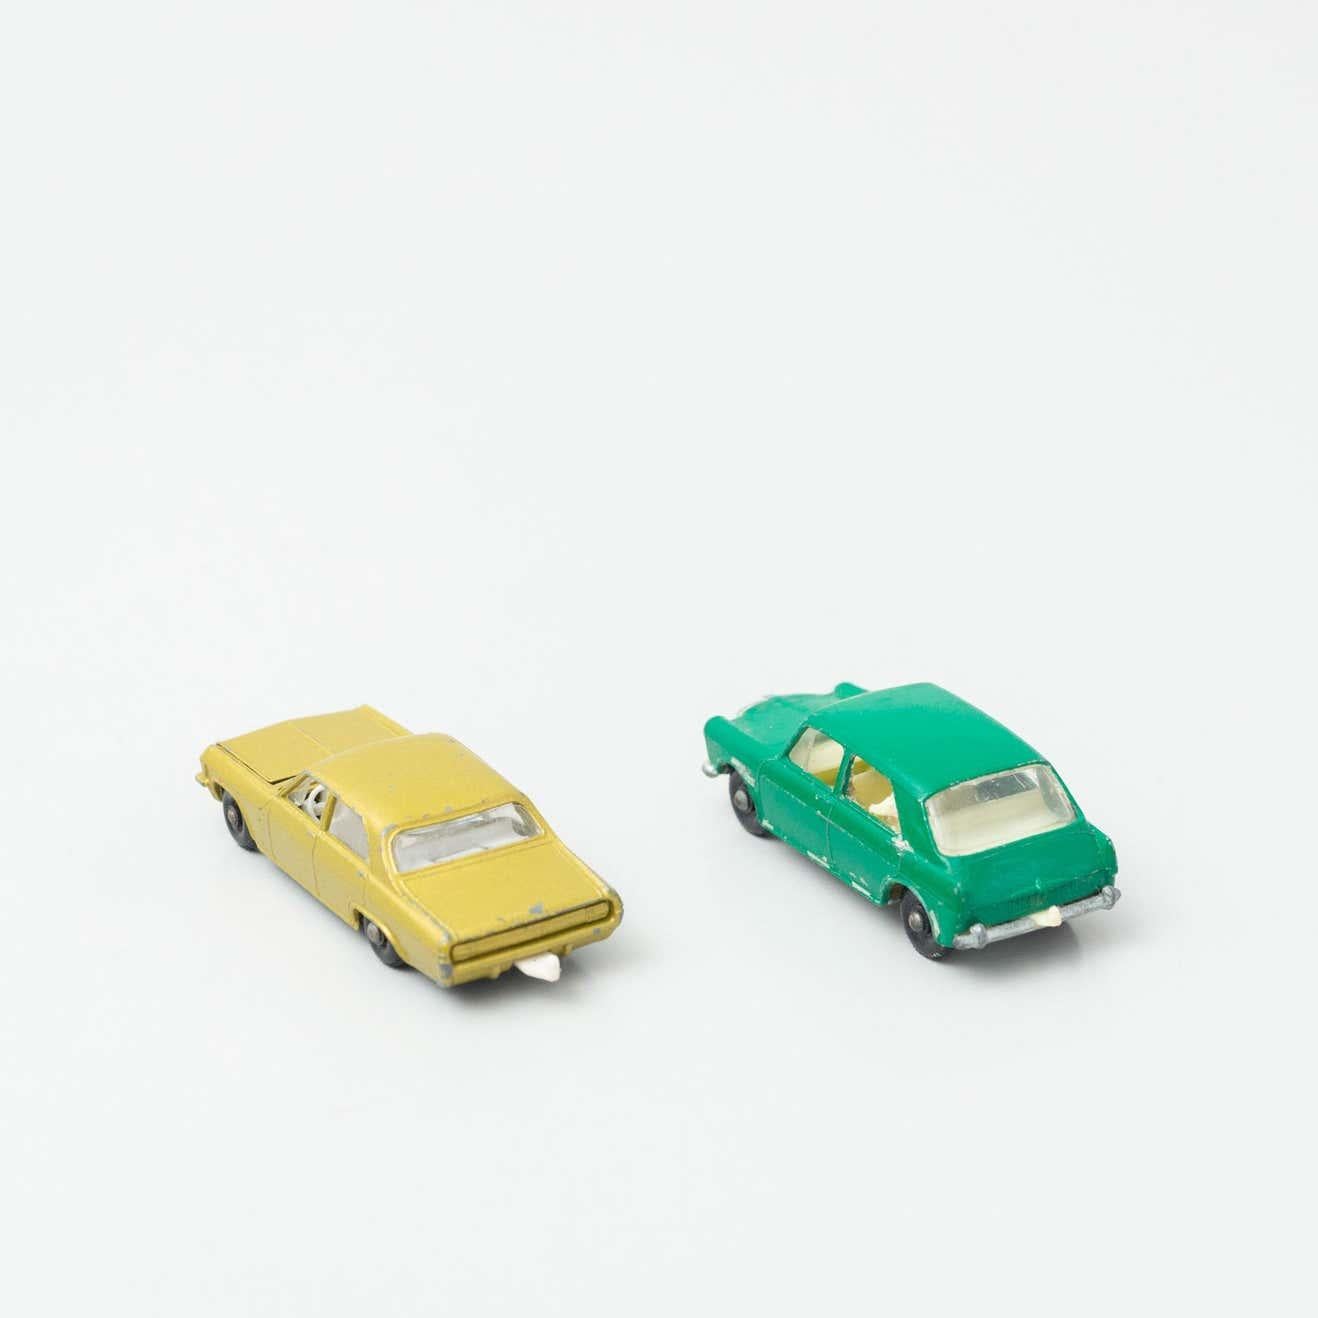 1960s matchbox cars for sale